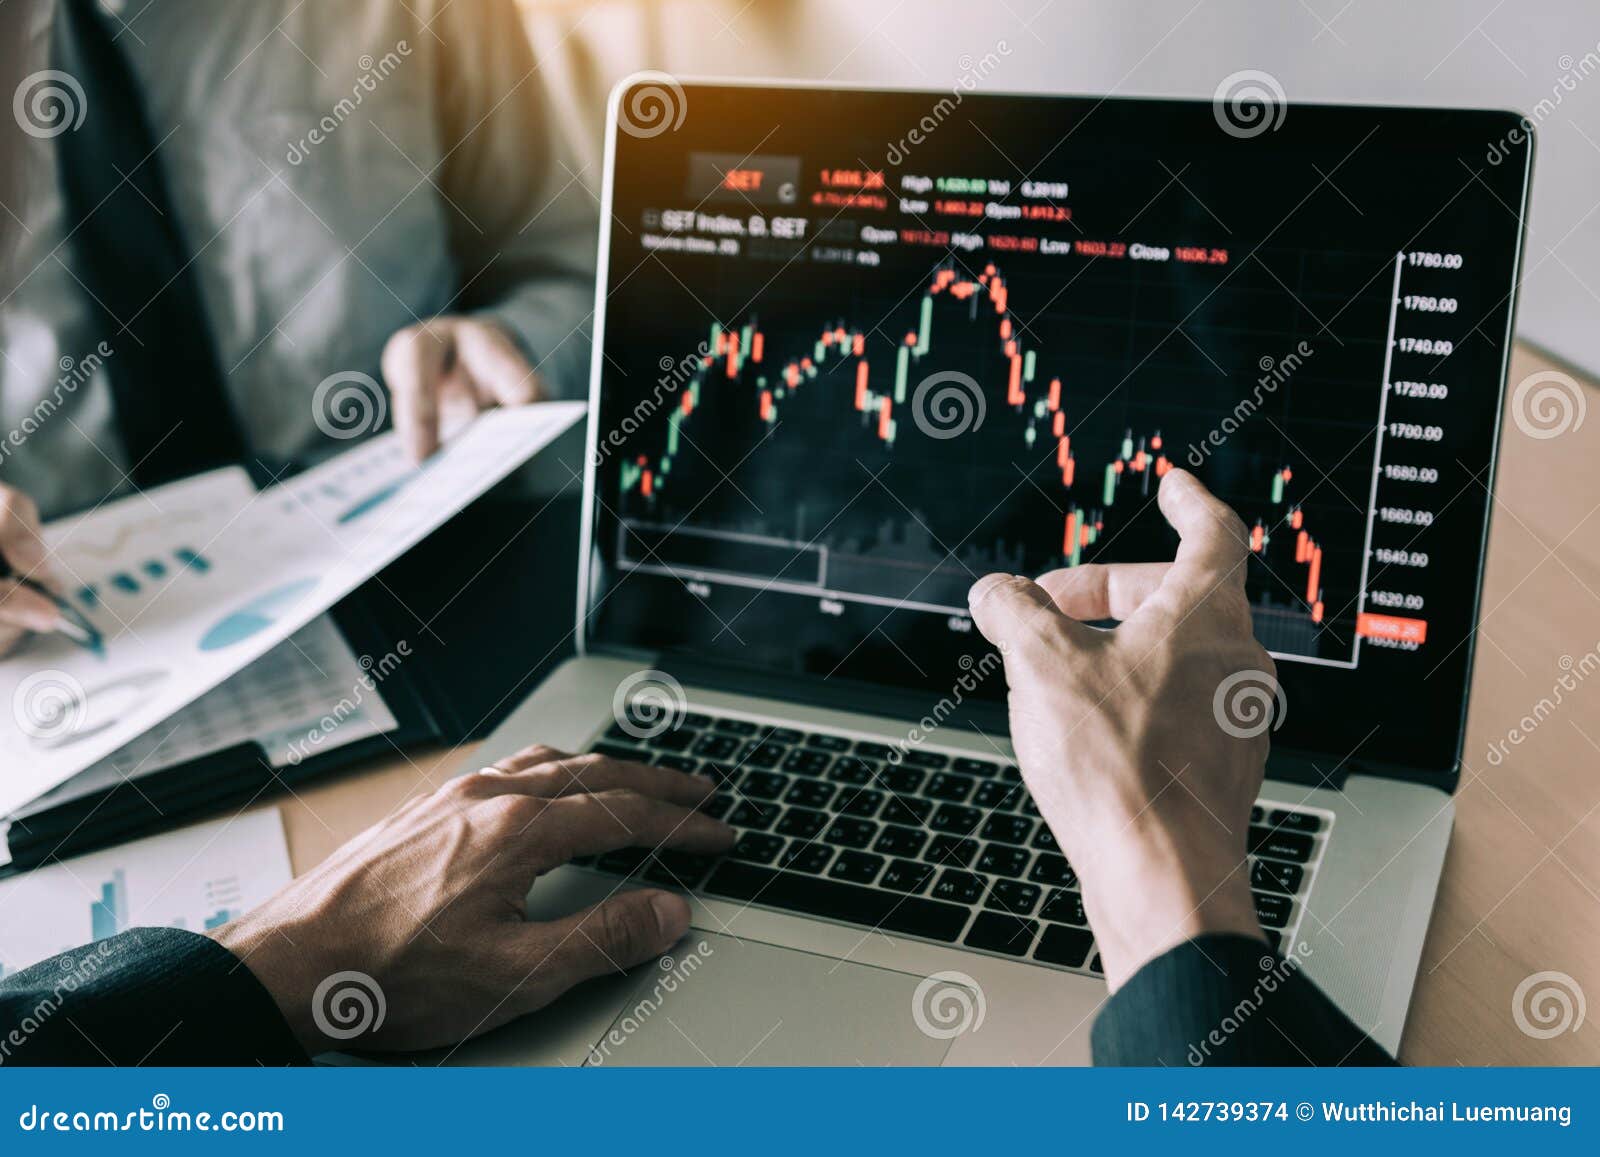 investors are pointing to laptops that have investment information stock markets and partners taking notes and analyzing